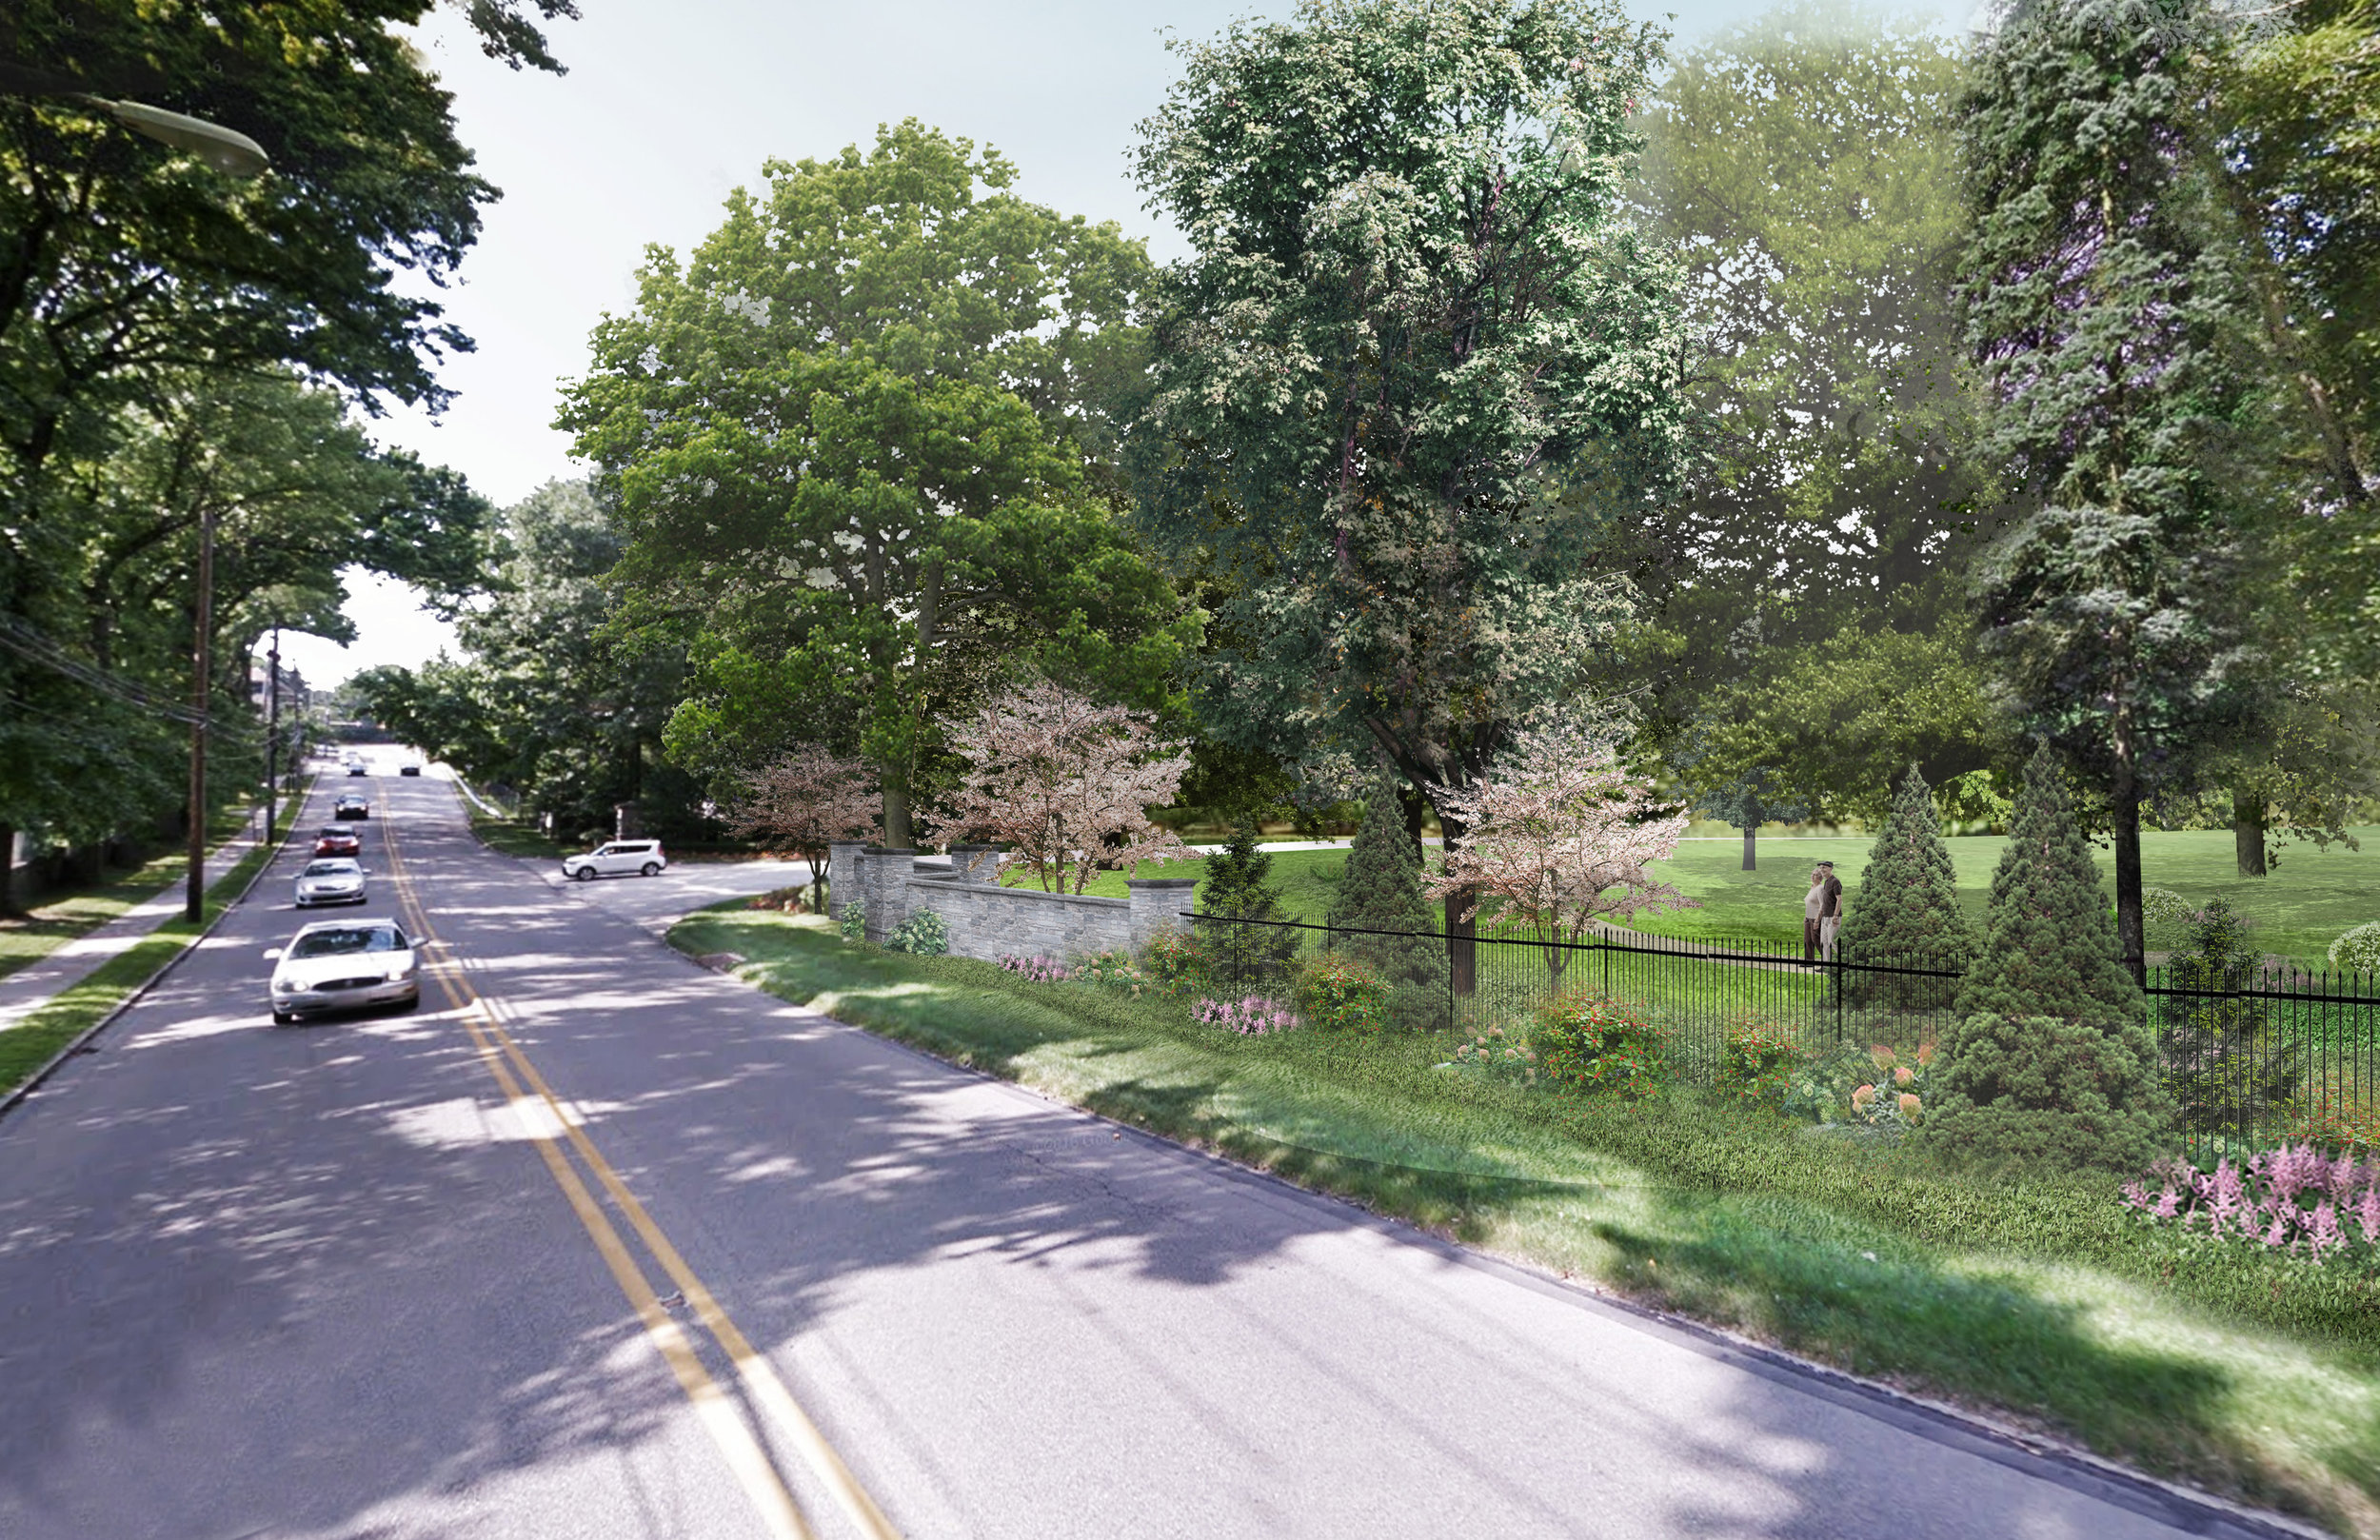  Rendering of Edge Buffer at West Laurel Hill Cemetery, Bala Cynwyd, PA (Rendering by Halvorson Design) 